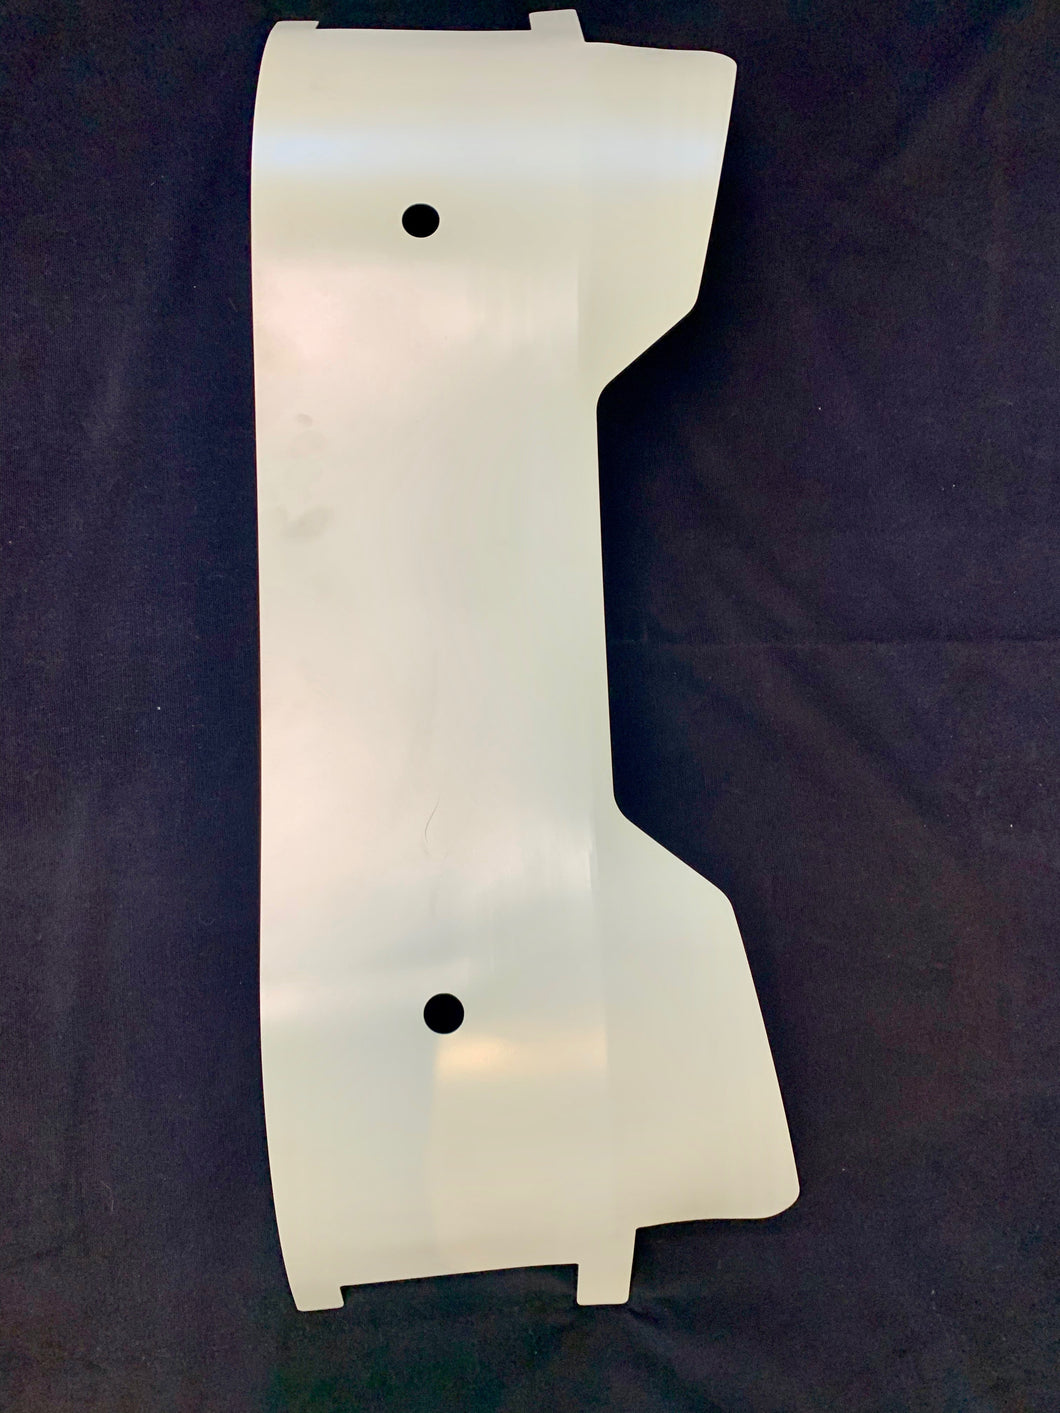 Gear Box belly skin to suit Cessna 180 and 185